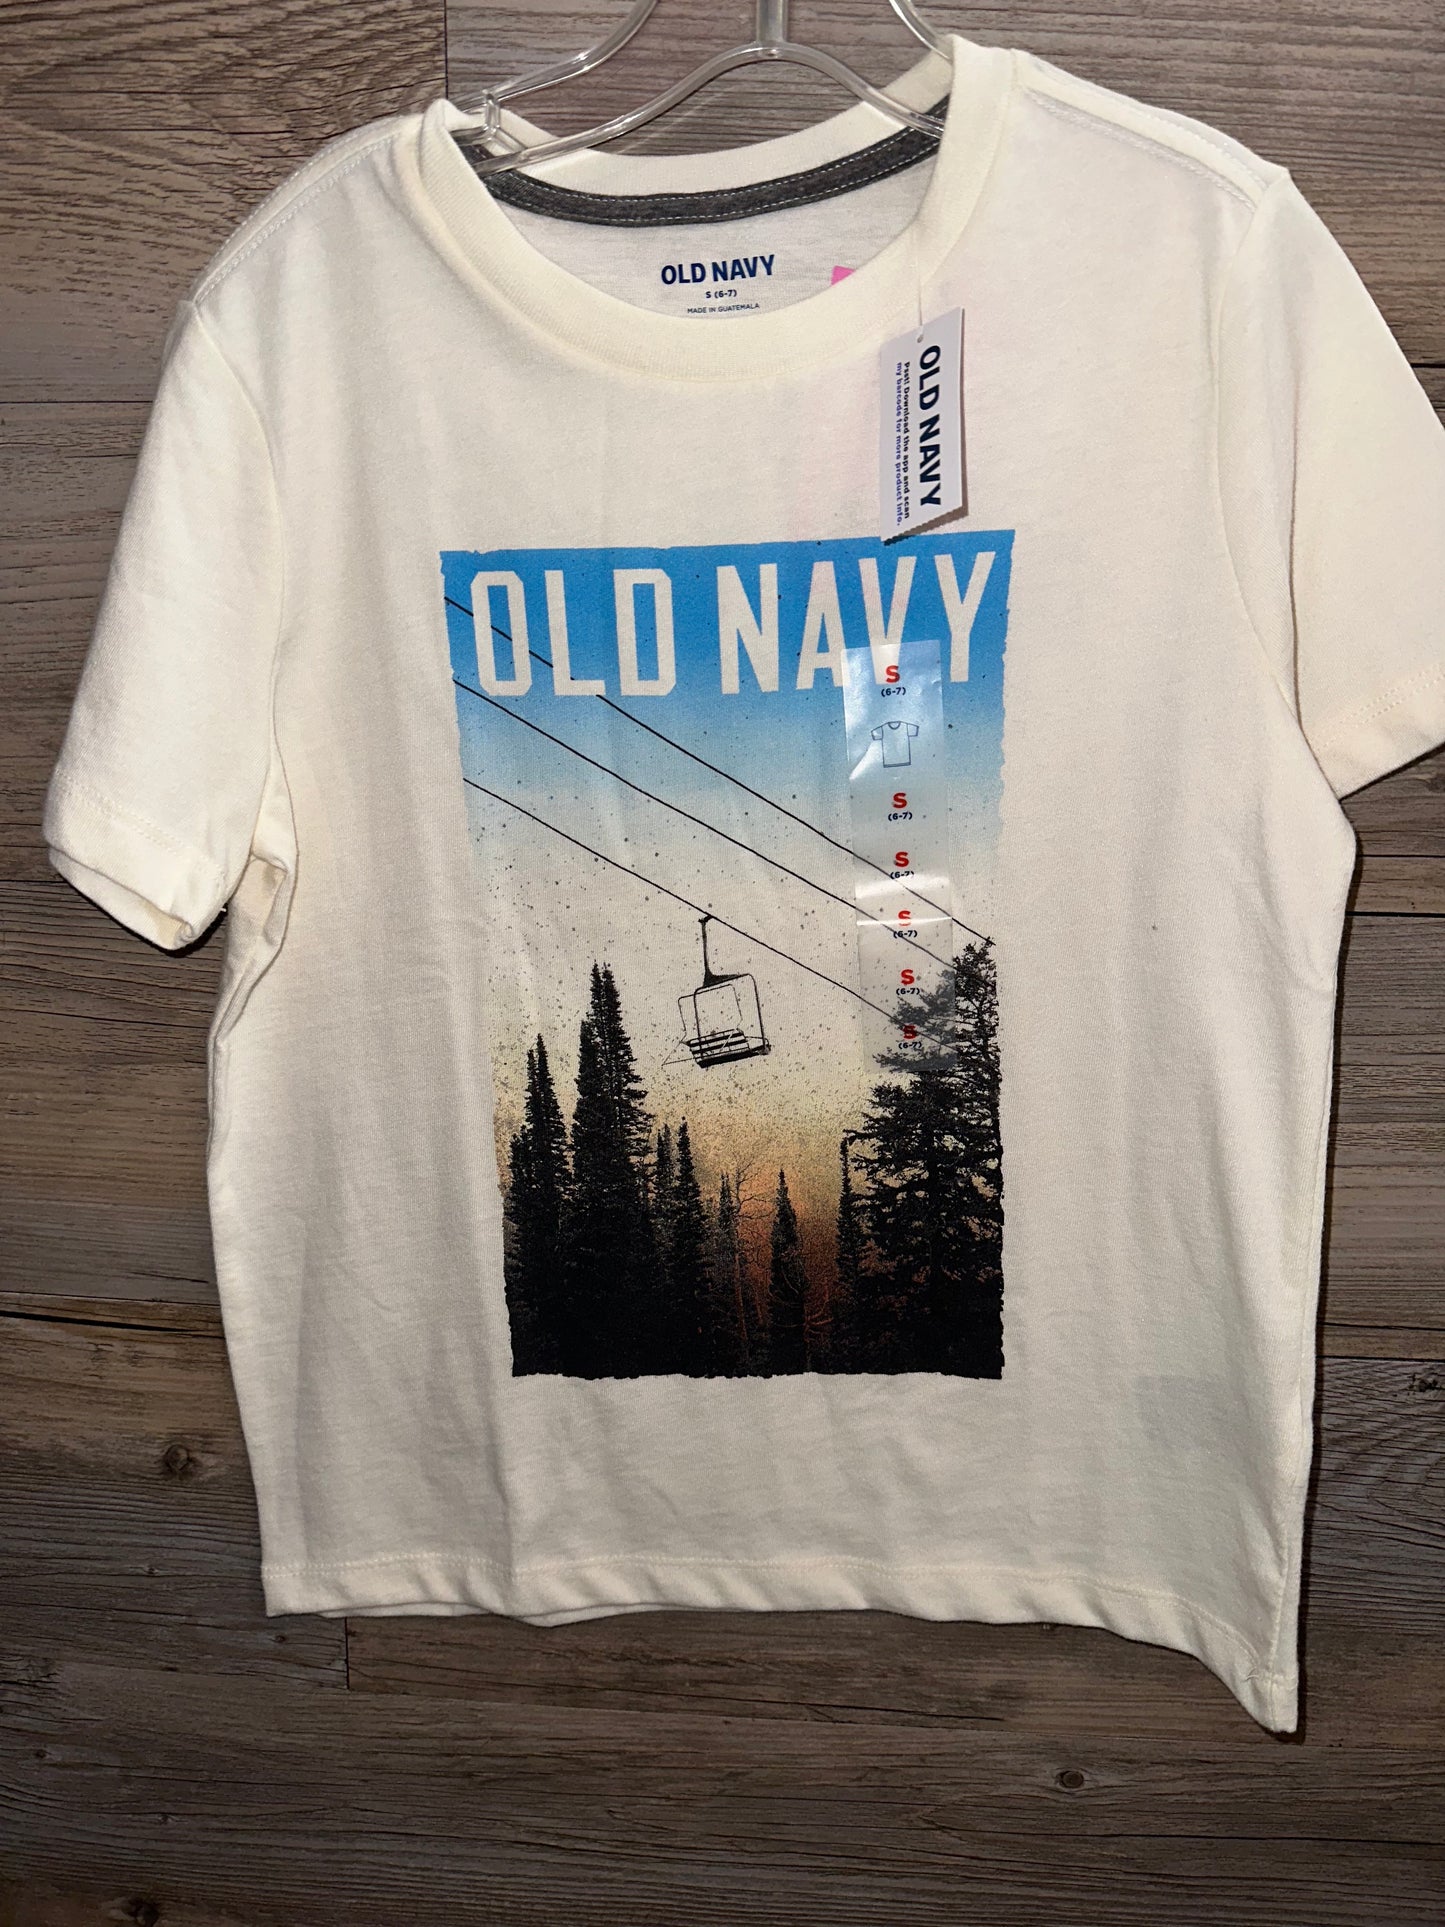 New Old Navy Shirt, Size 5T